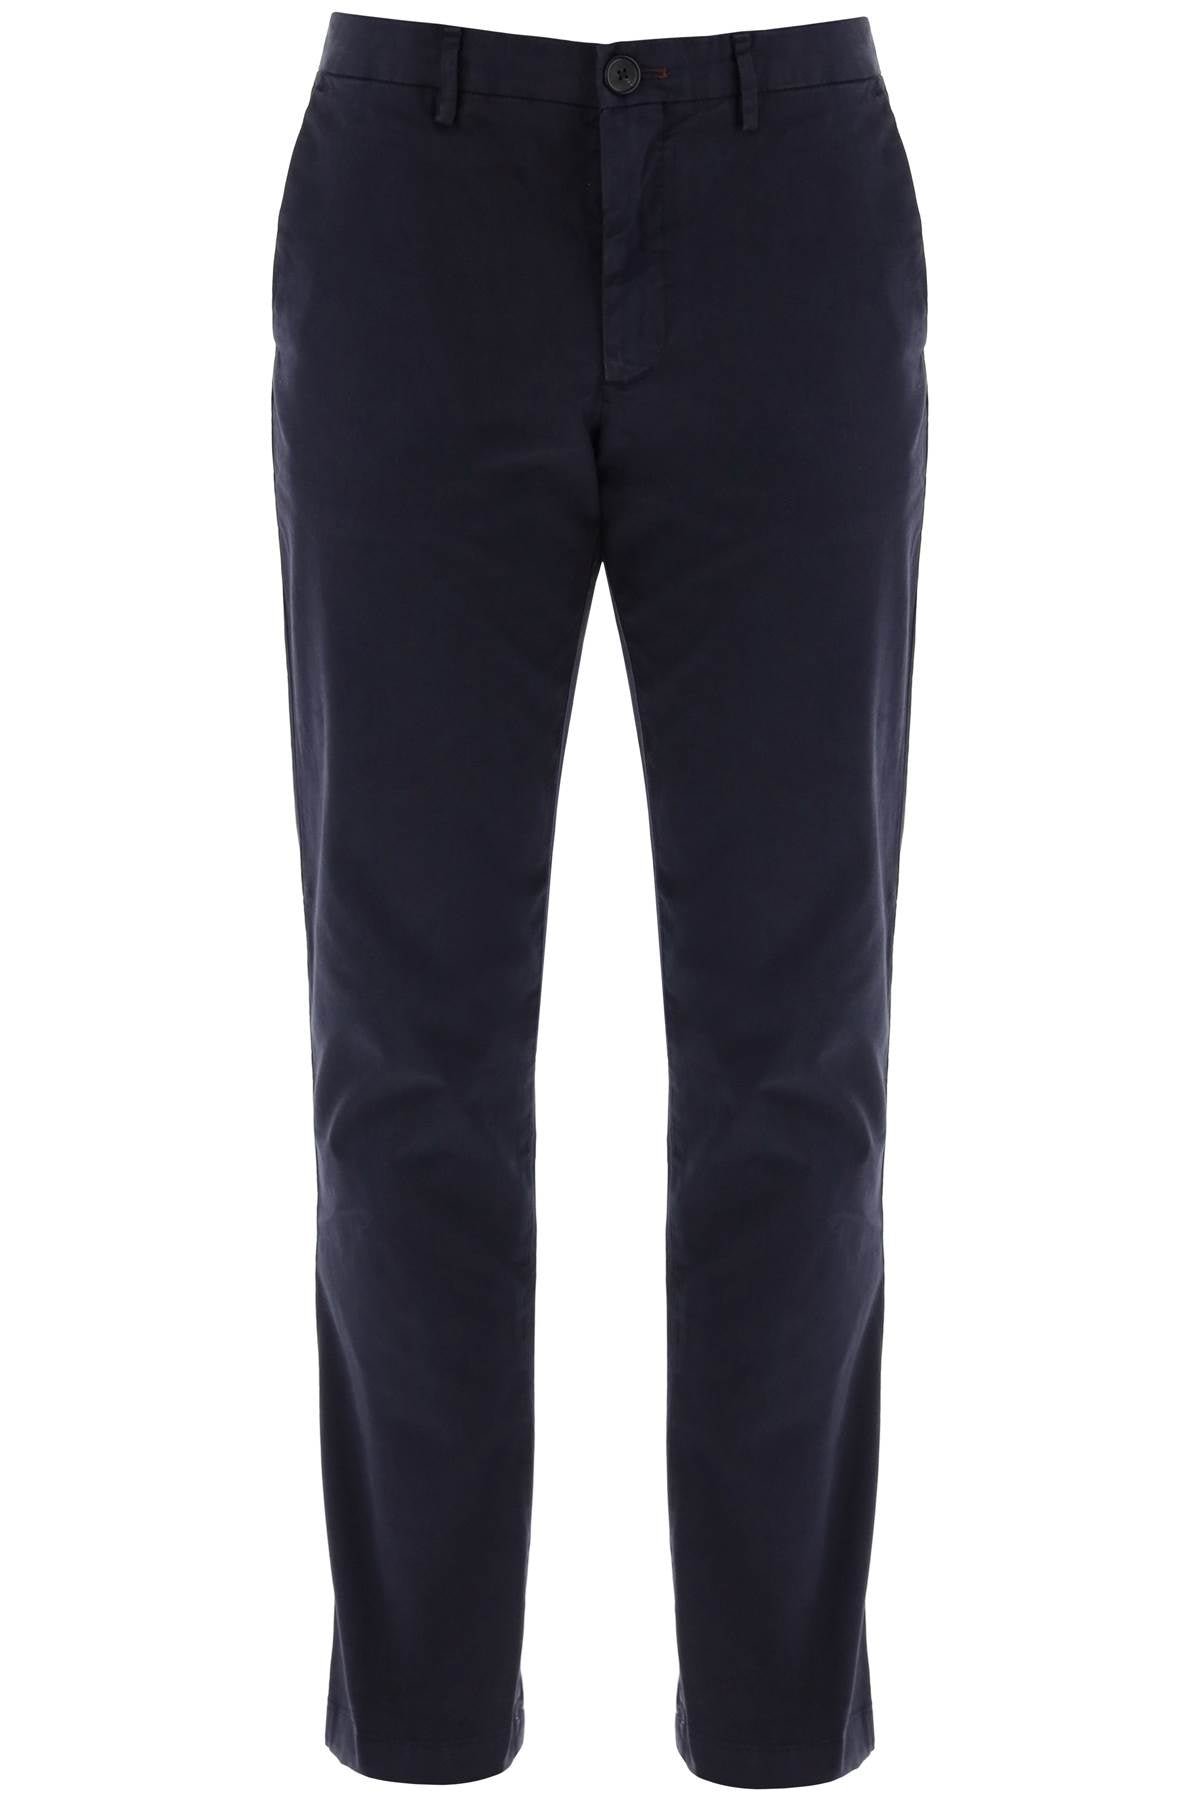 Ps paul smith cotton stretch chino pants for-0